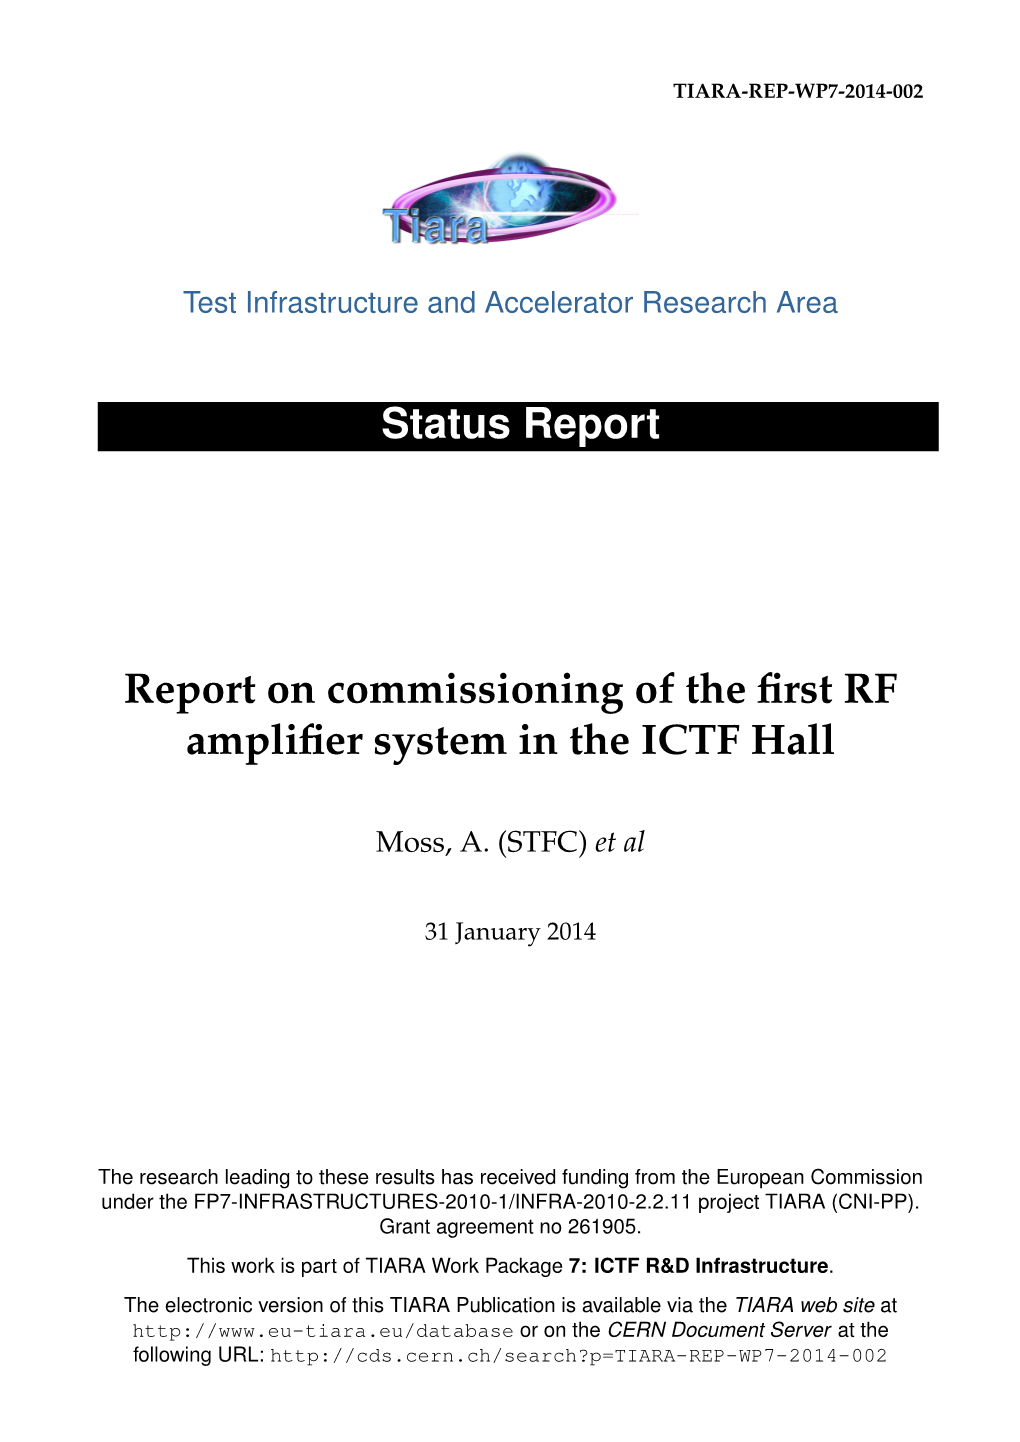 Status Report Report on Commissioning of the First RF